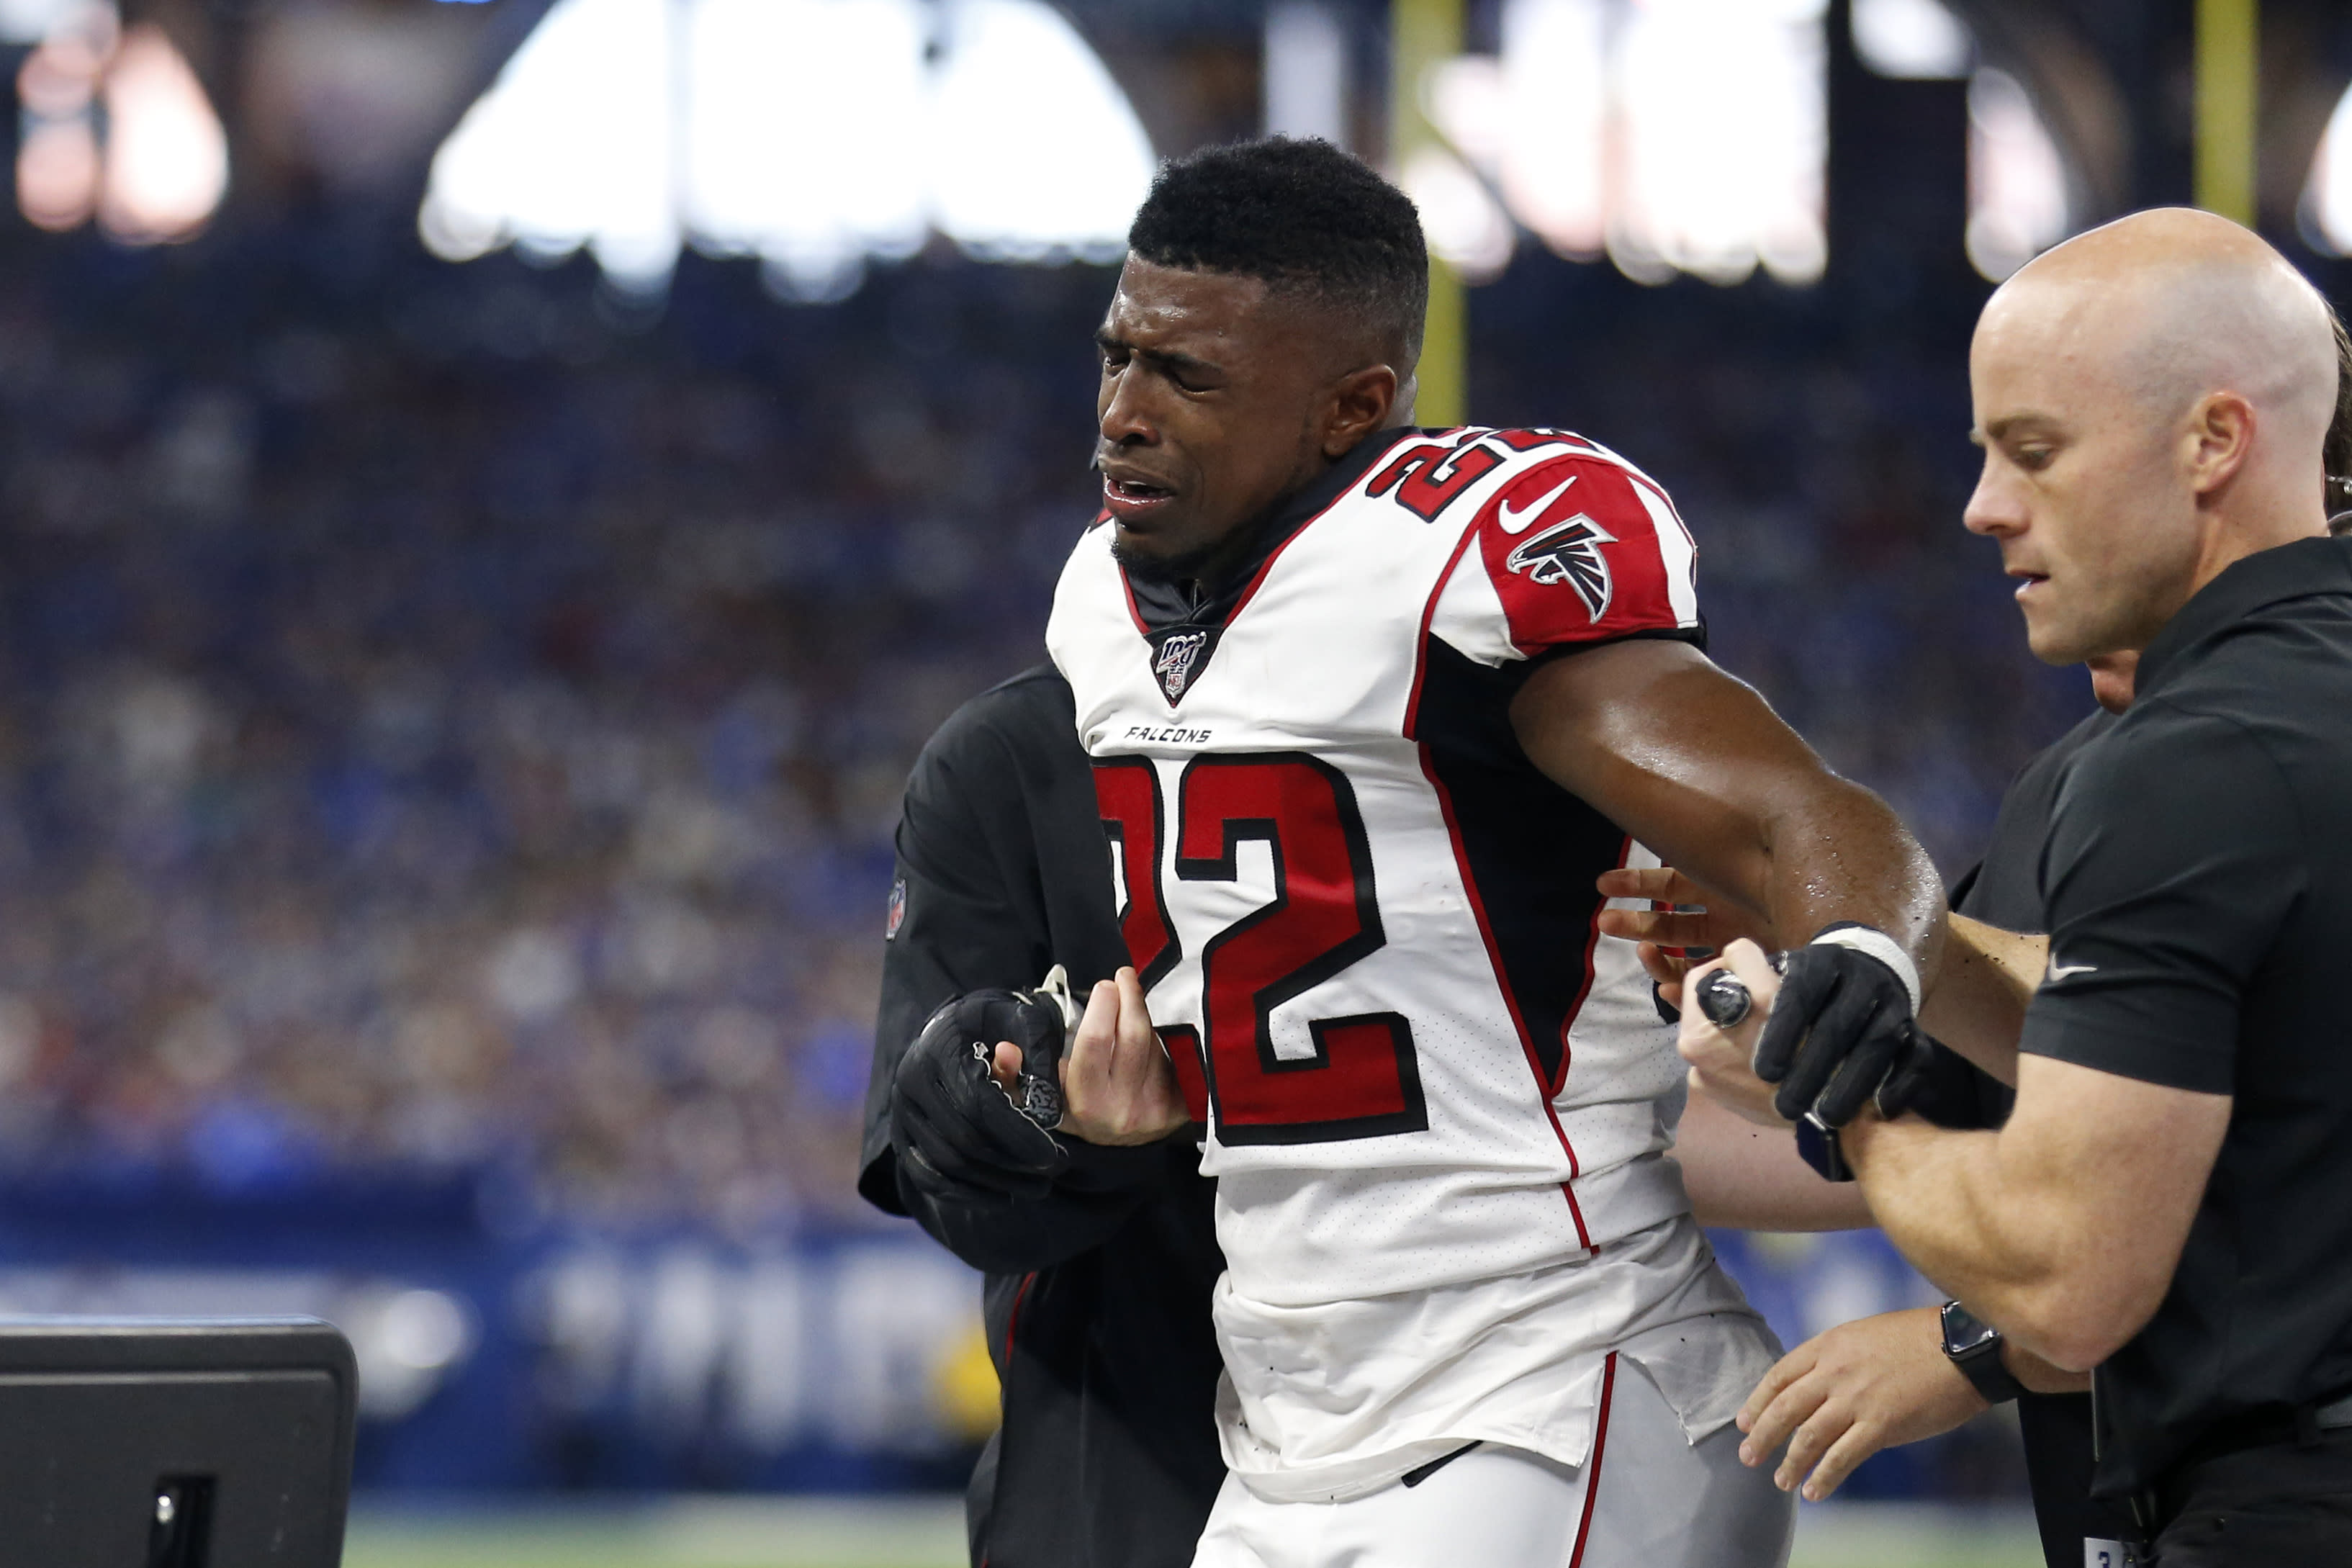 Falcons S Keanu Neal Visibly Upset After Suffering Non